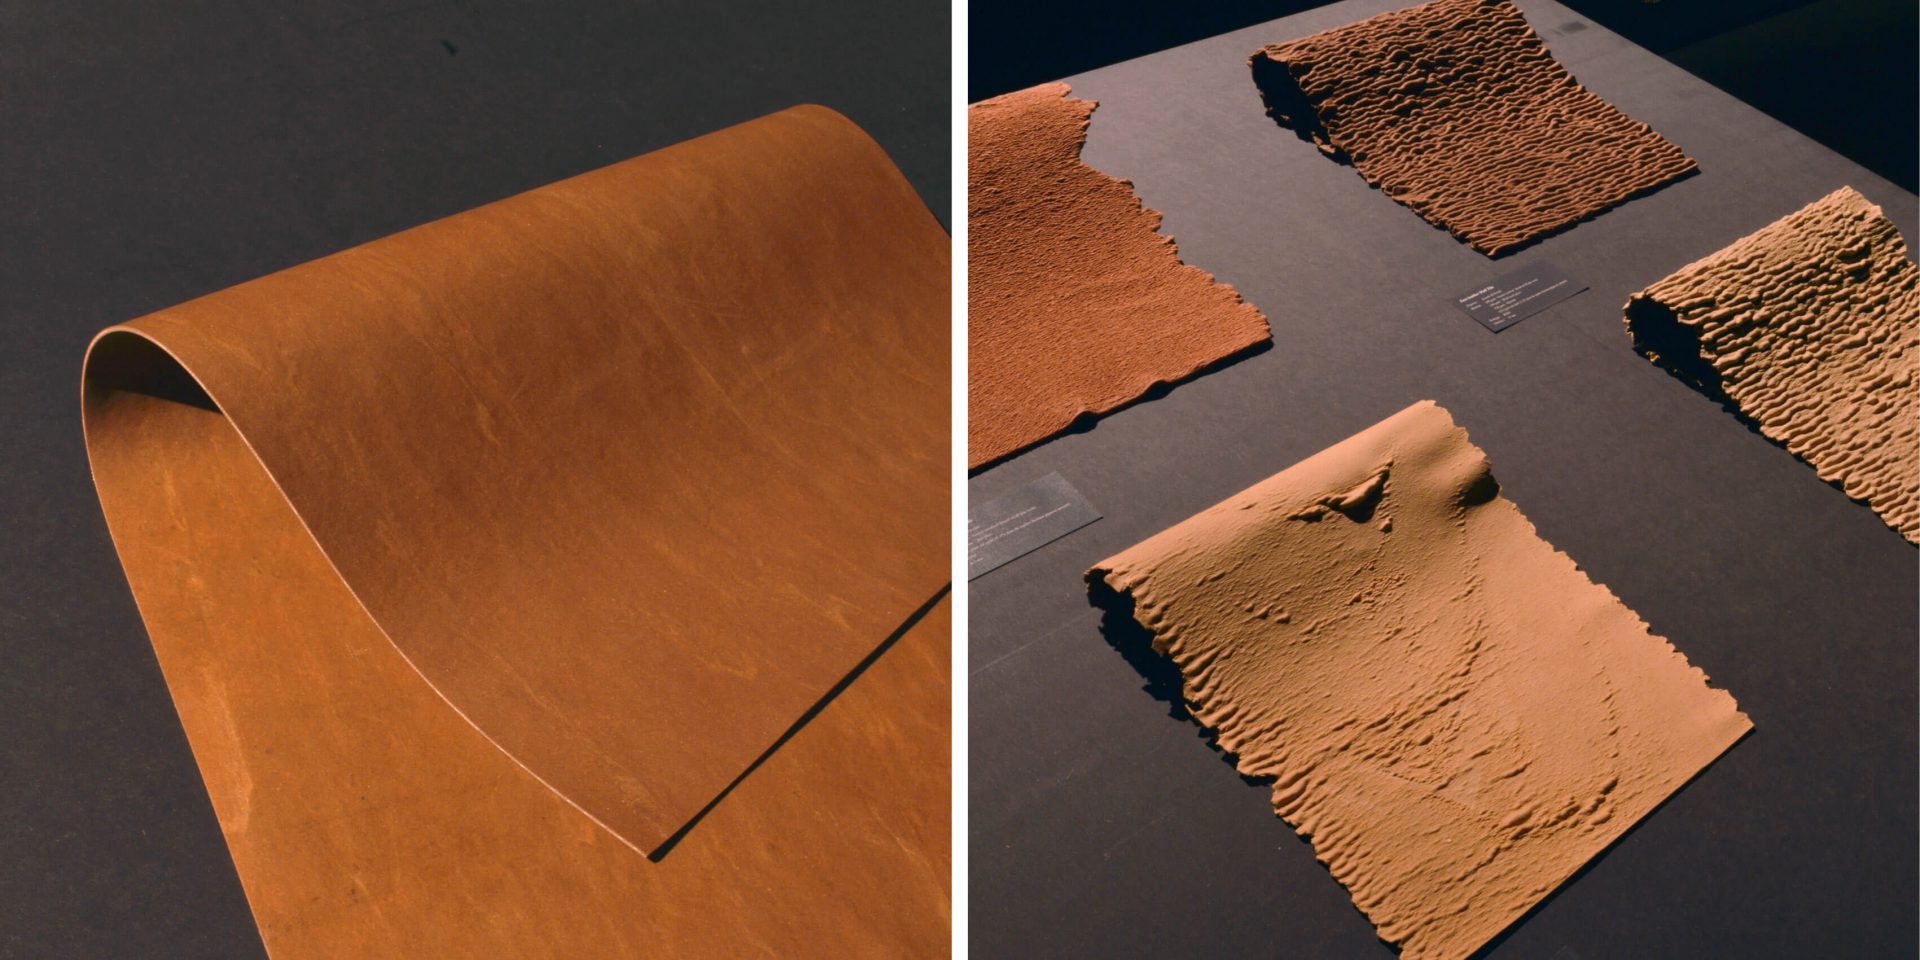  Lino Leather is available in two different versions: the first is thicker and wrinkled, while the second version is softer